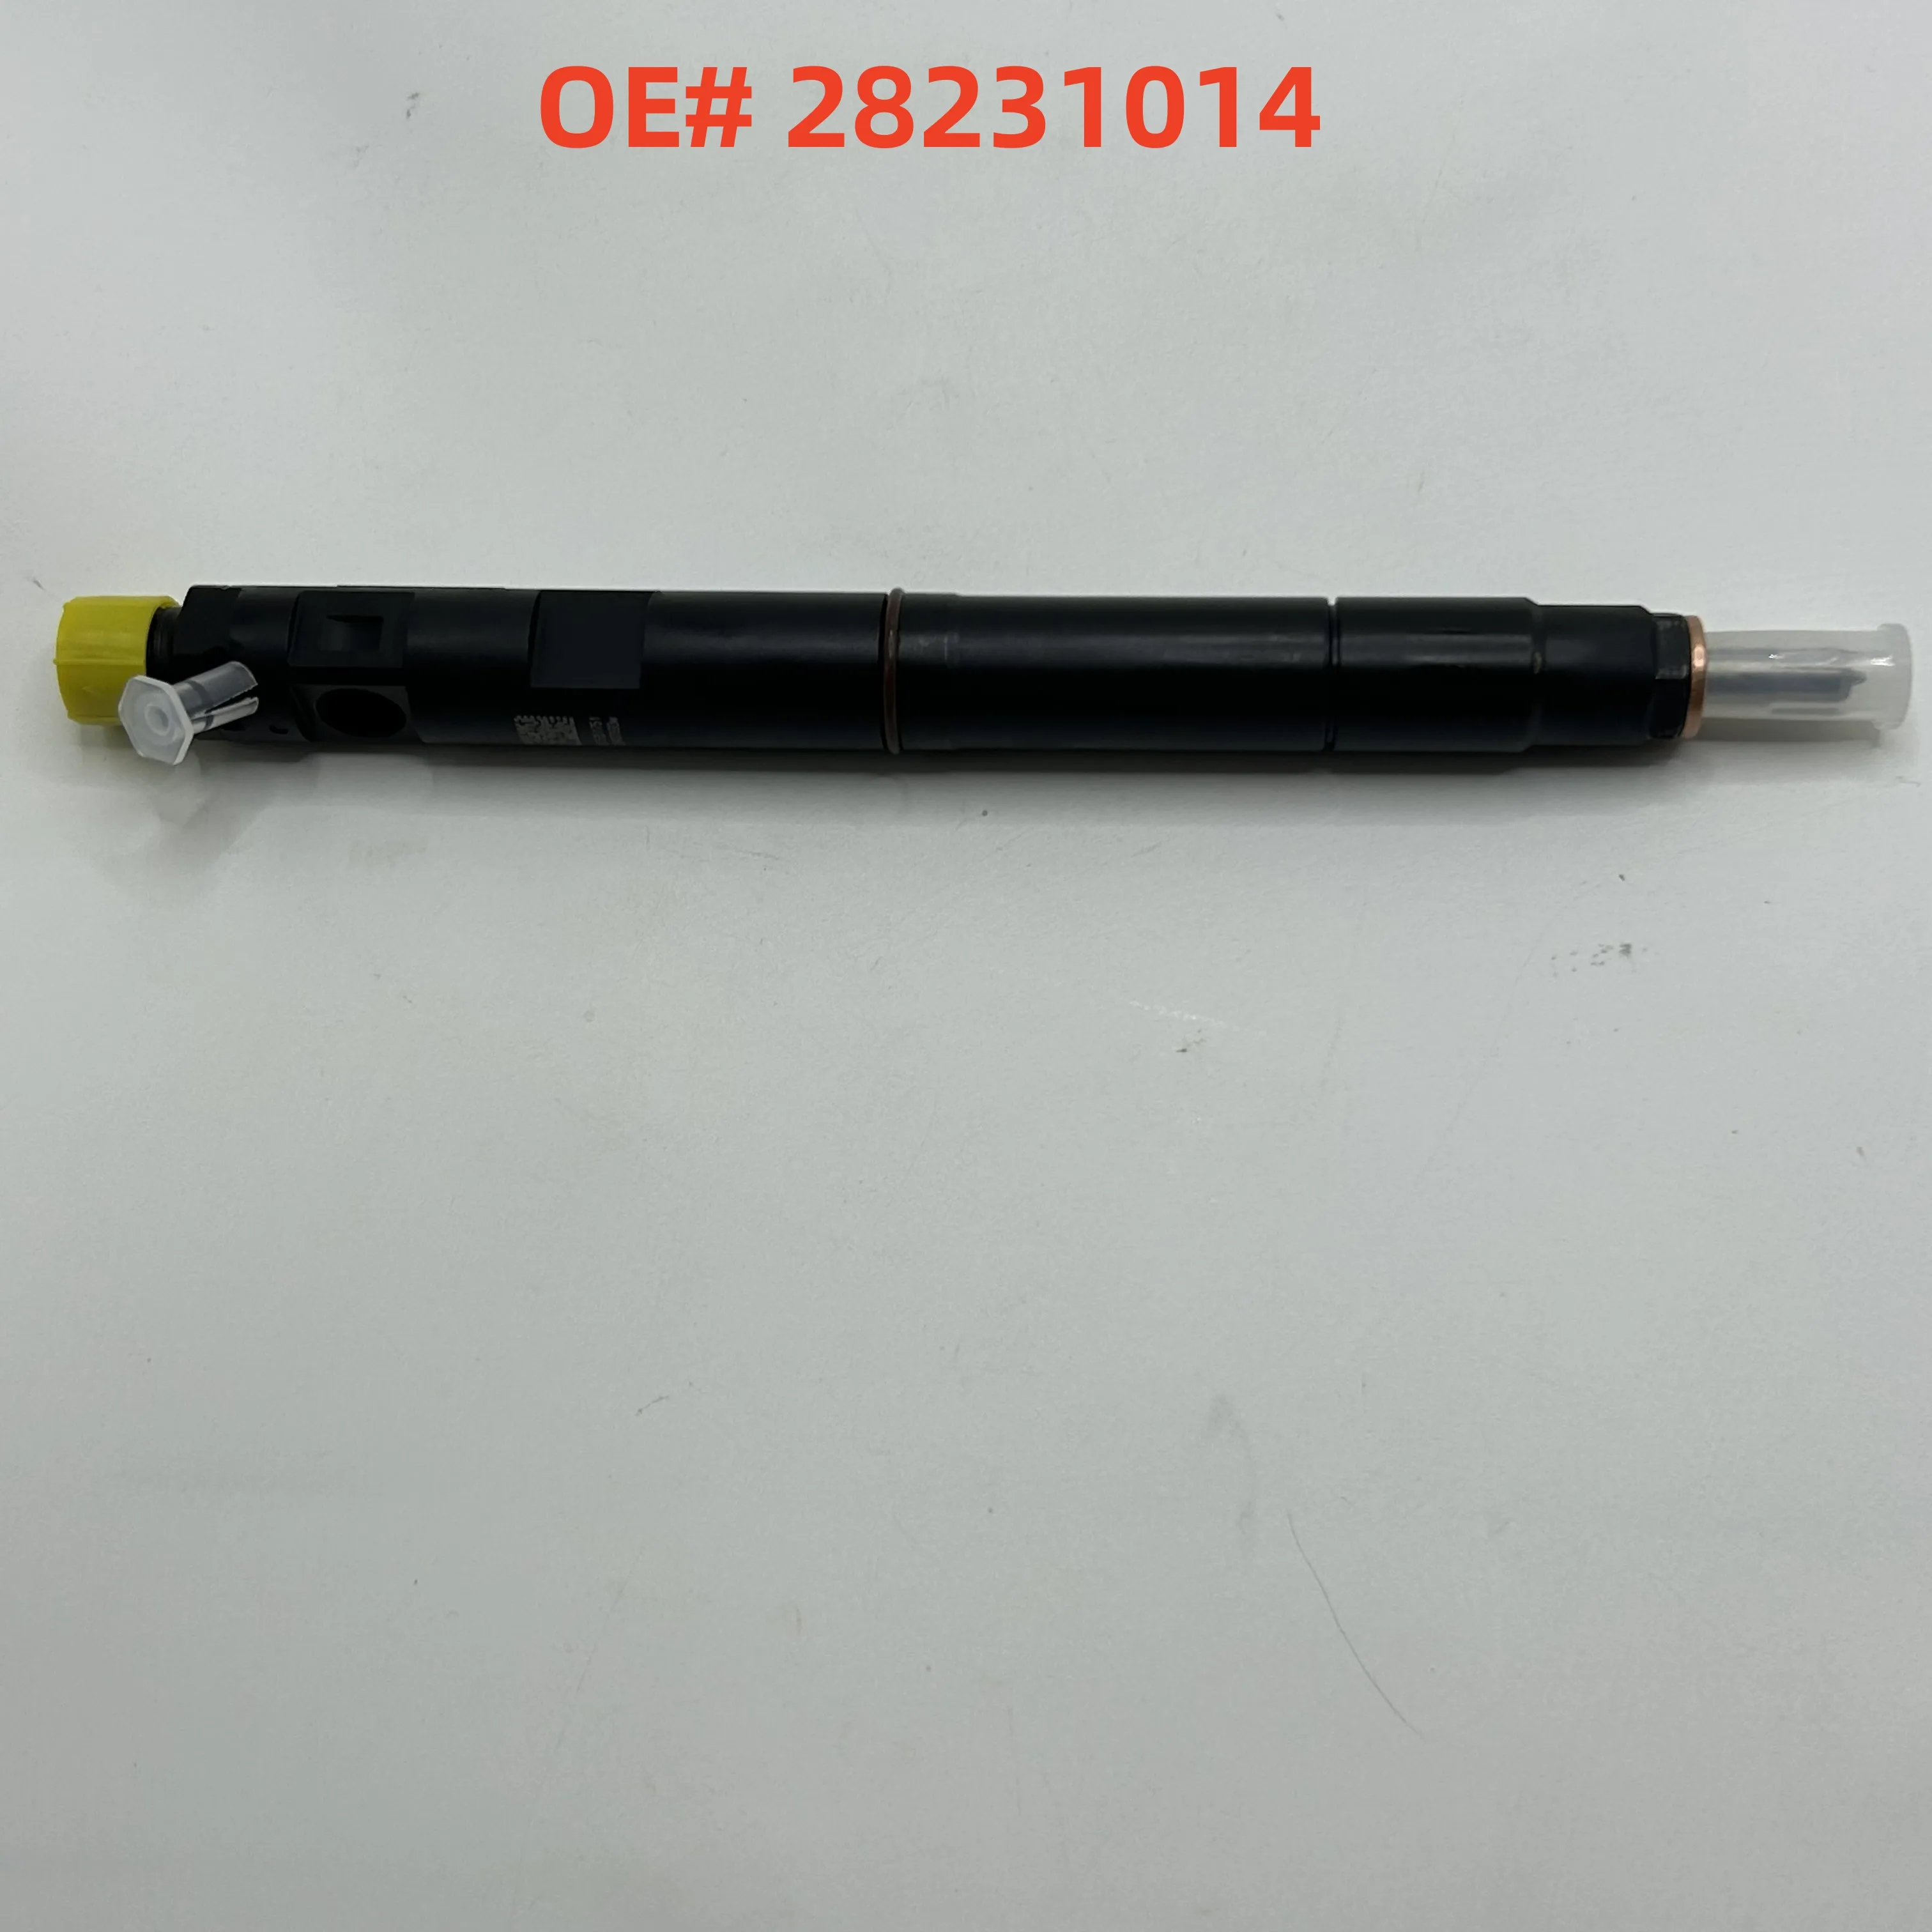 

NEW 28231014 1100100-ED01 New Diesel Injector Nozzle For Delphi Great Wall Hover H5 H6 GW4D20 2.0T Engine